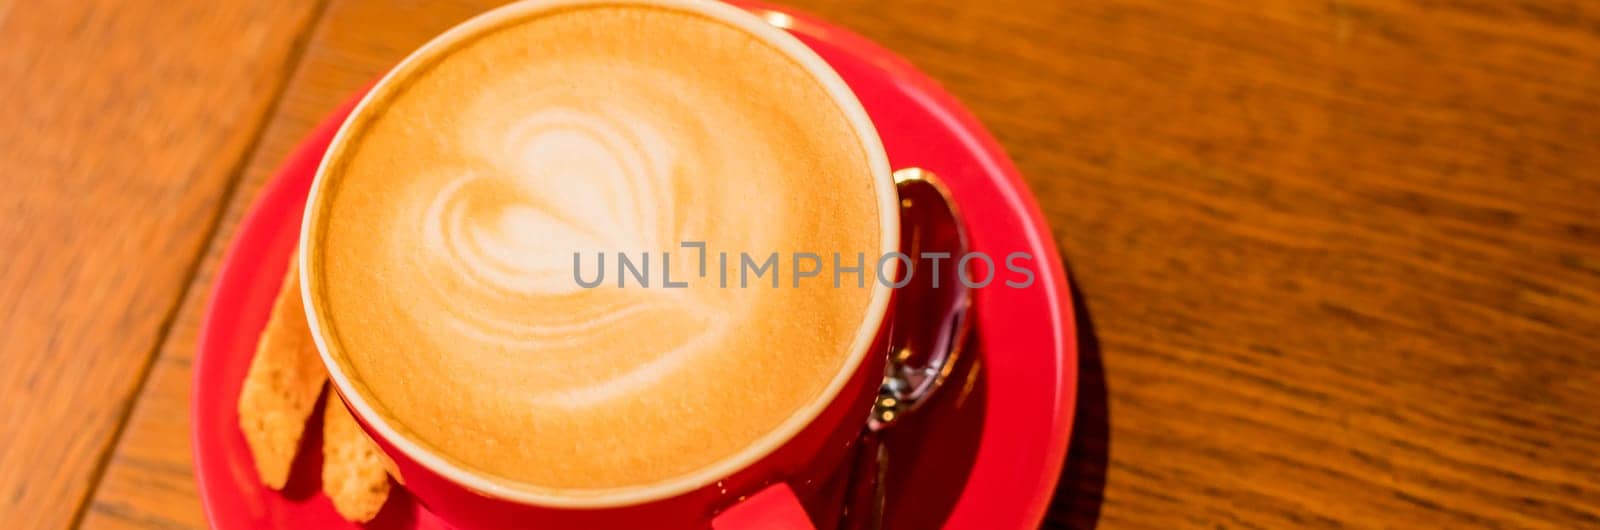 Latte Art,Side view of hot coffee isolated on wooden background.Morning with a red cup of coffee or cappuccino. Art and craft coffee. web banner. Happy valentines day by YuliaYaspe1979